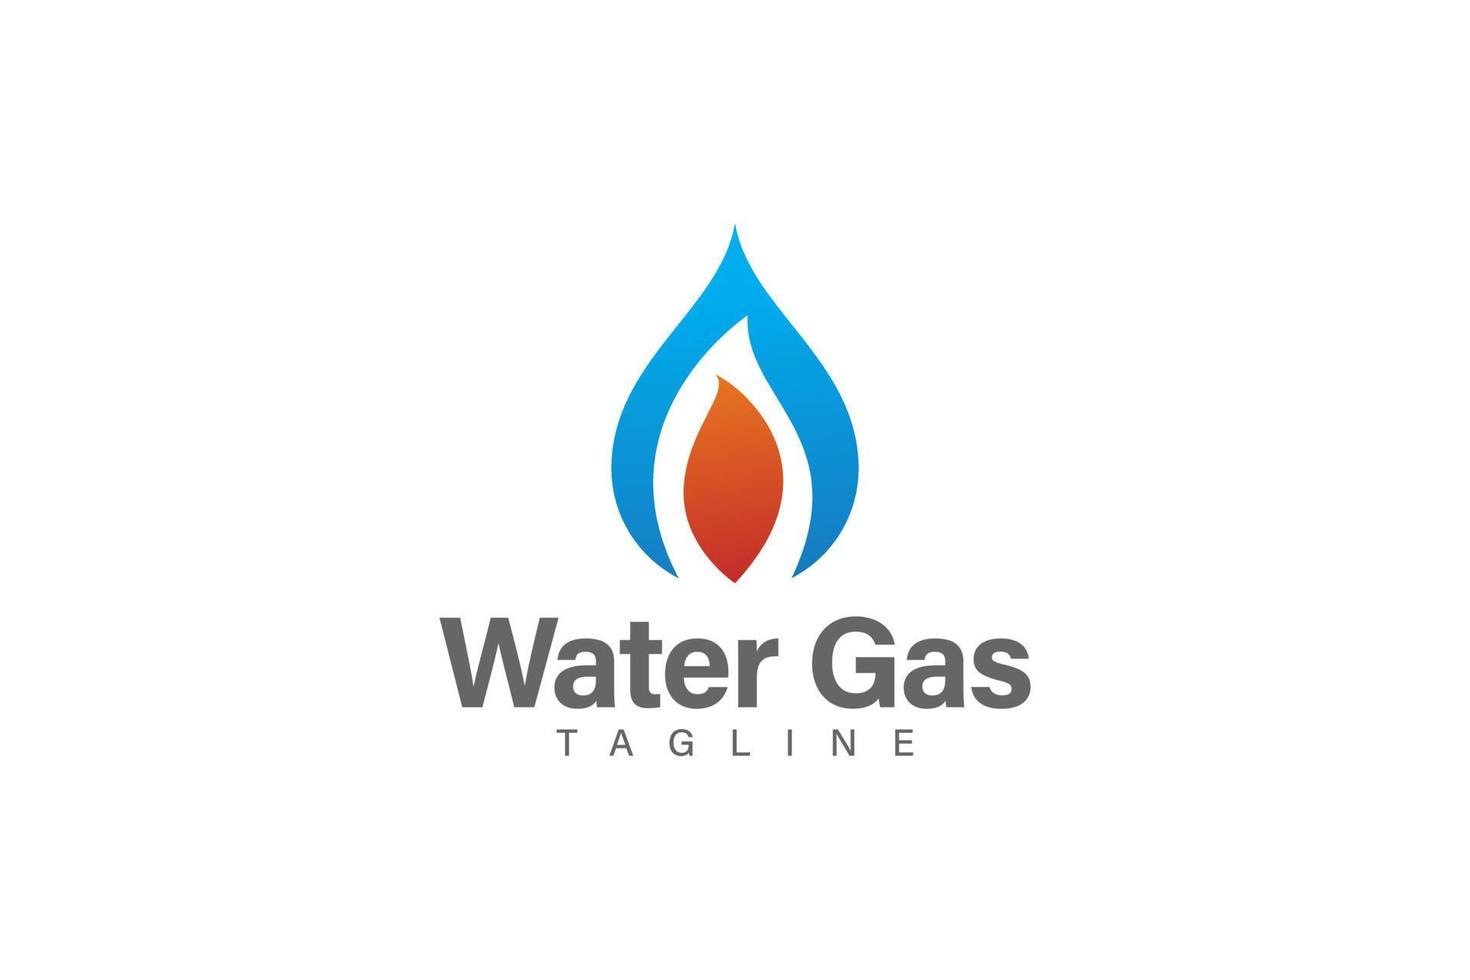 Water and gas logo design vector